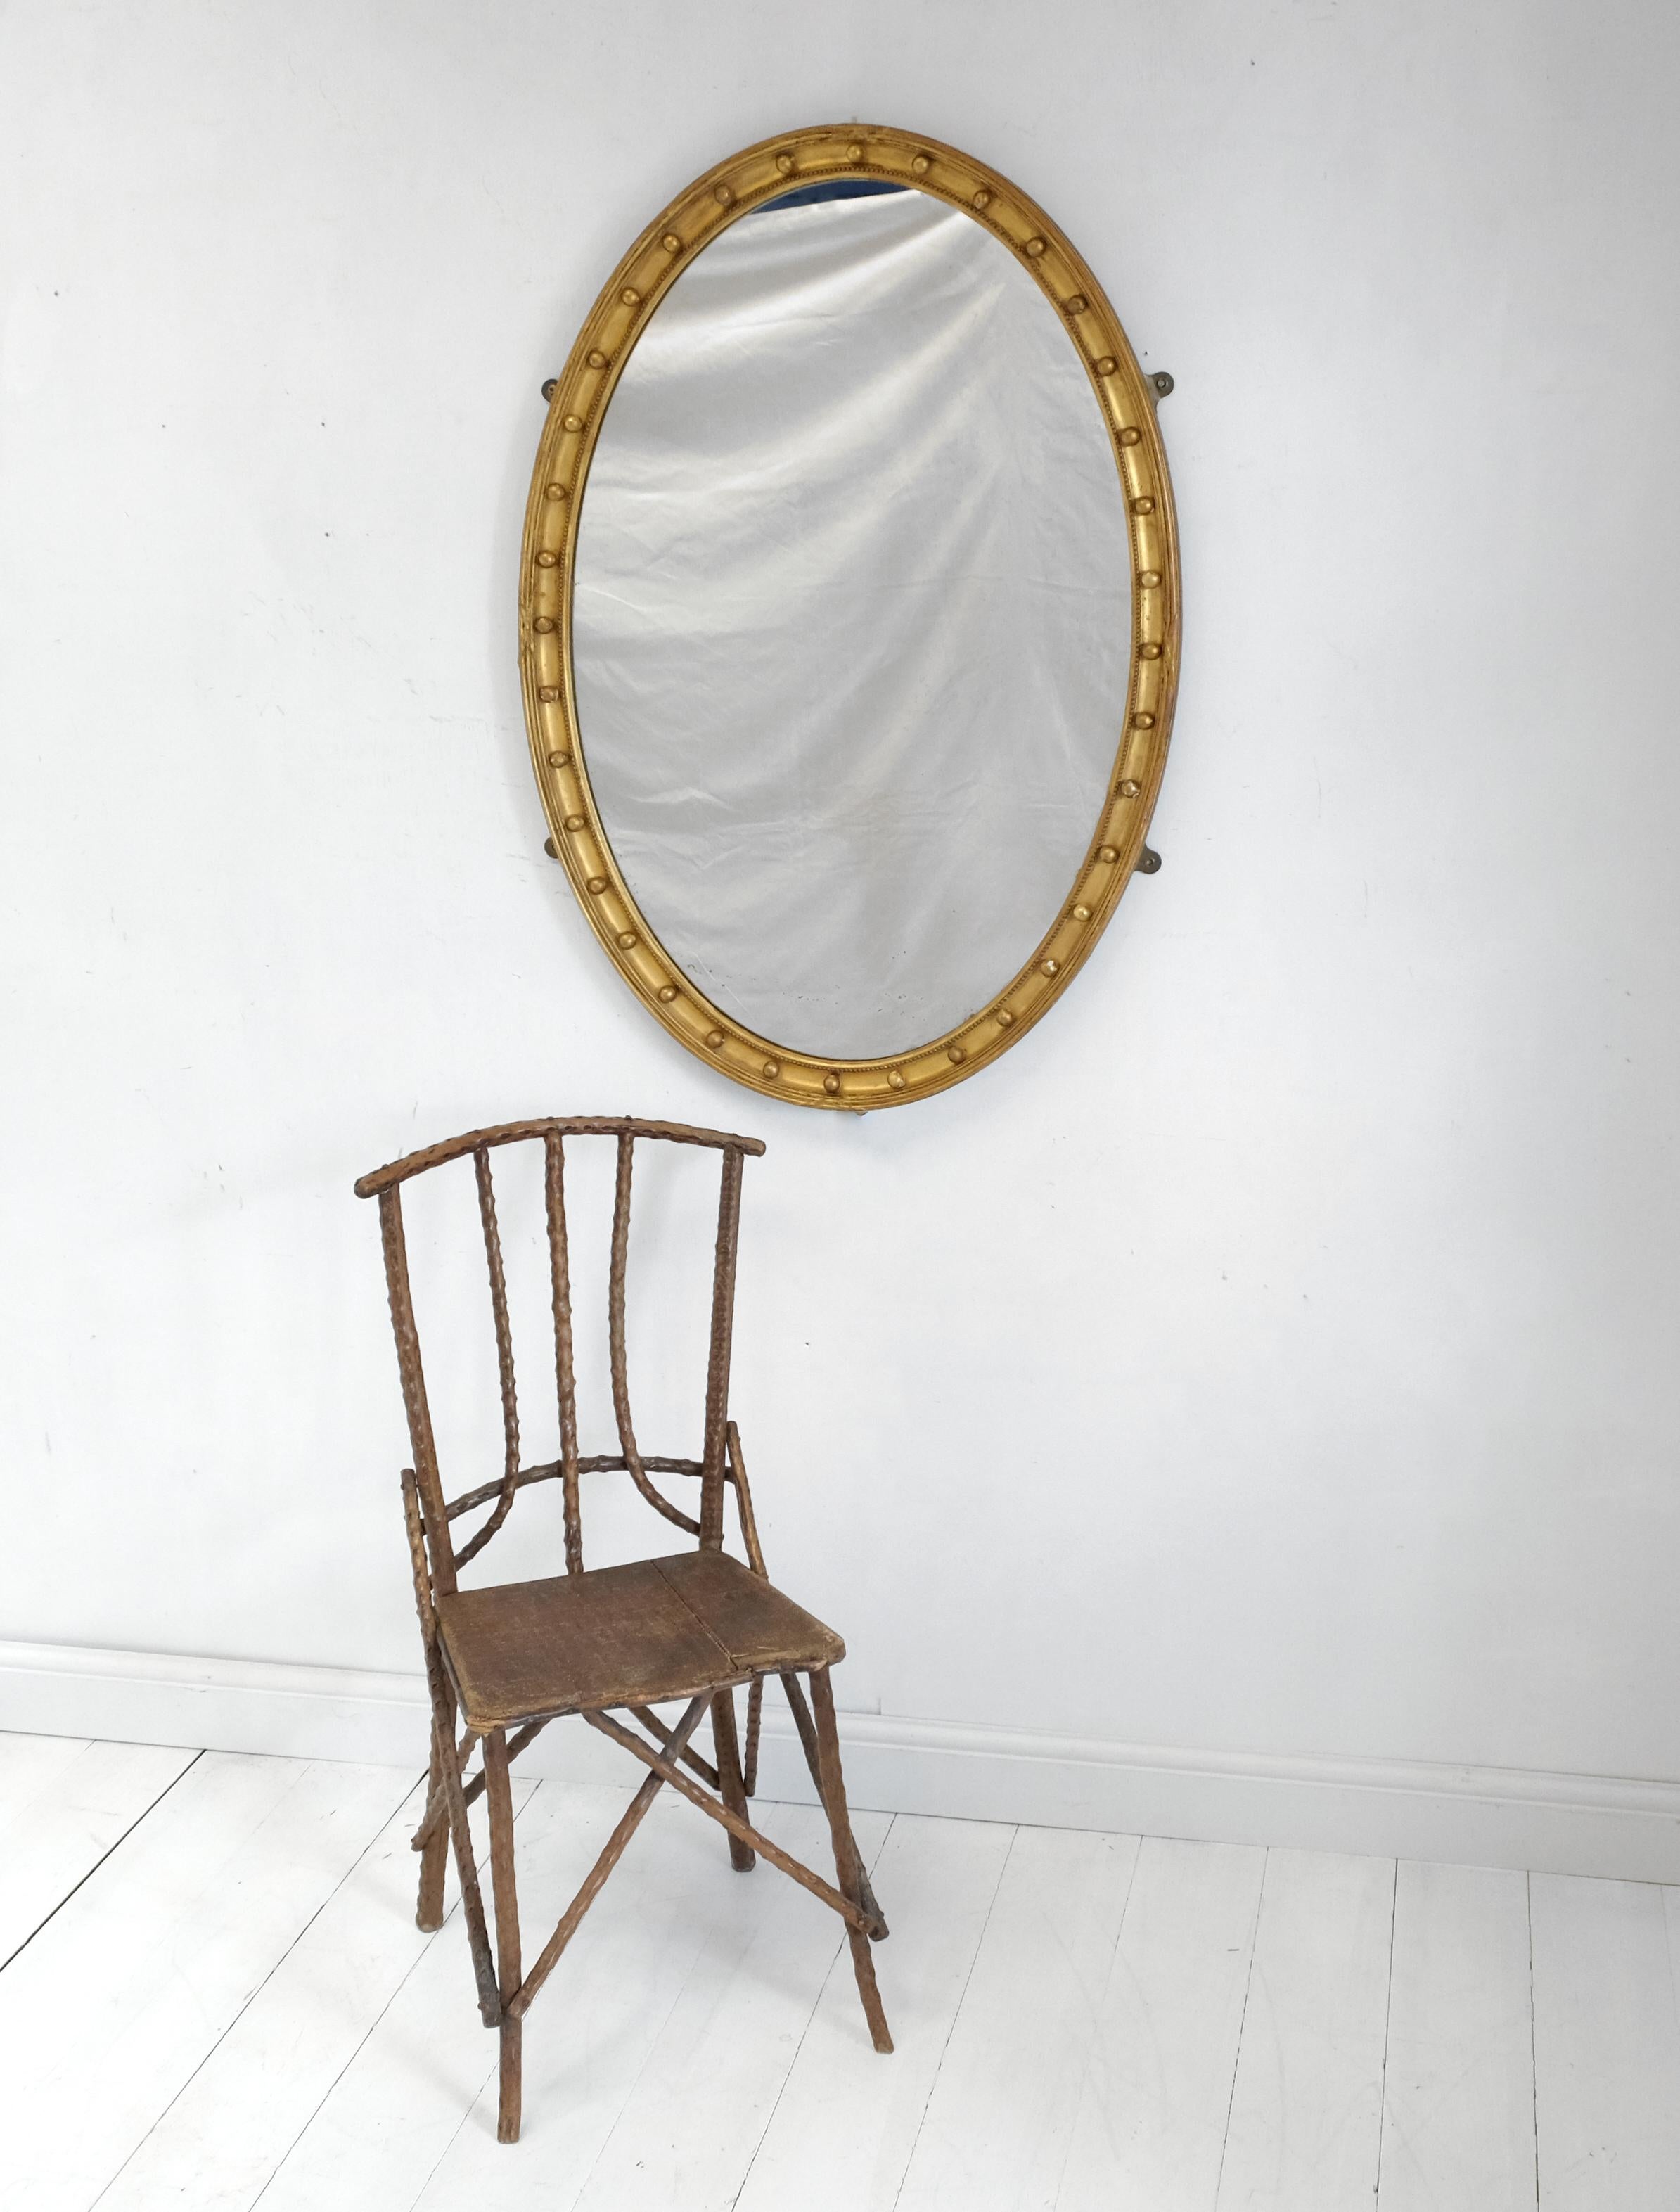 Glass Large English 19th Century Giltwood Oval Mirror, Water Gilded, Georgian Style